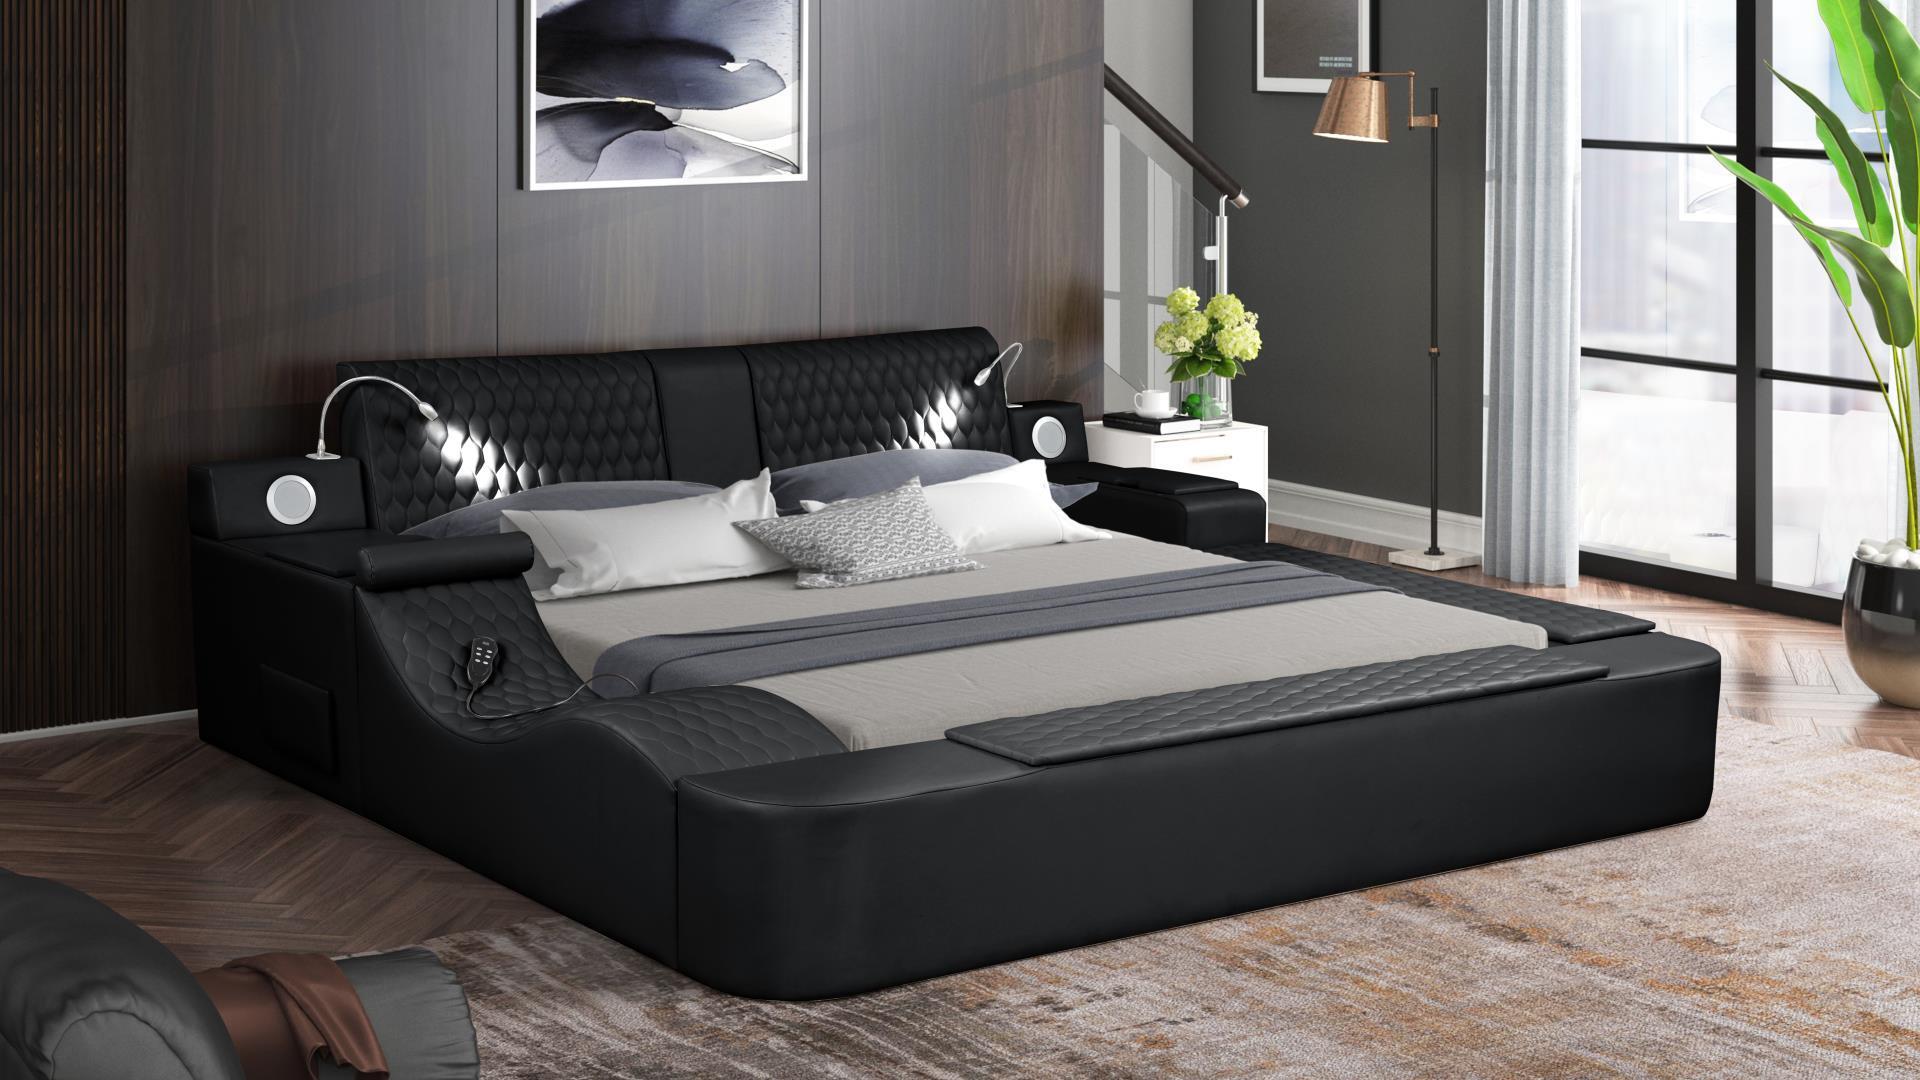 

    
Black Eco Leather Smart Multifunctional Queen Bed ZOYA Galaxy Home Contemporary
